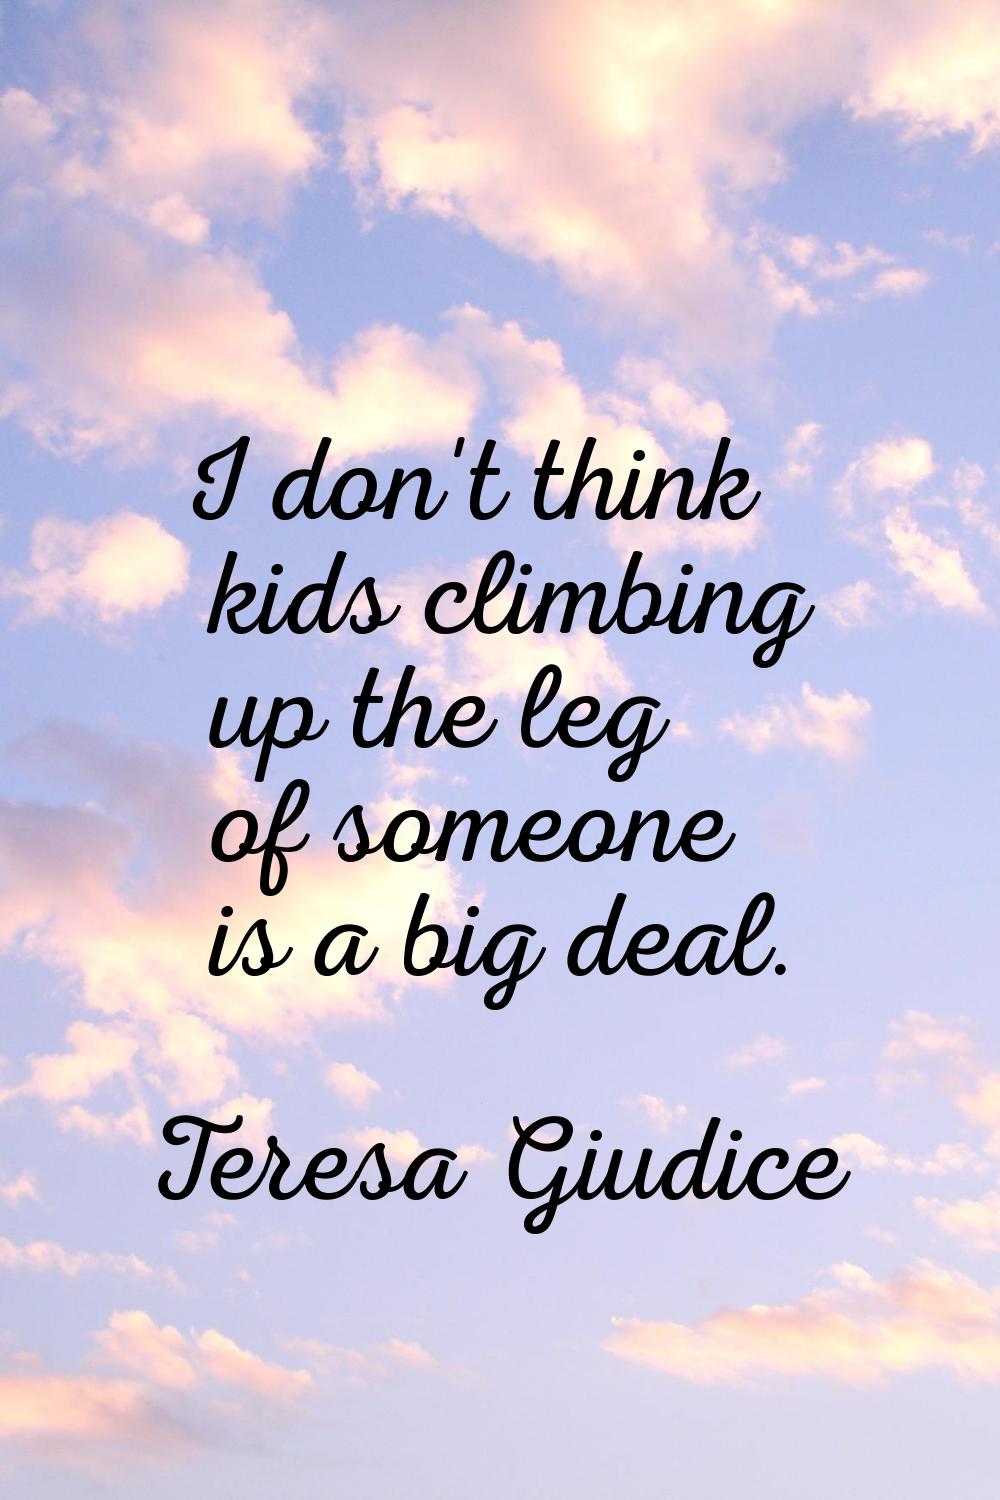 I don't think kids climbing up the leg of someone is a big deal.